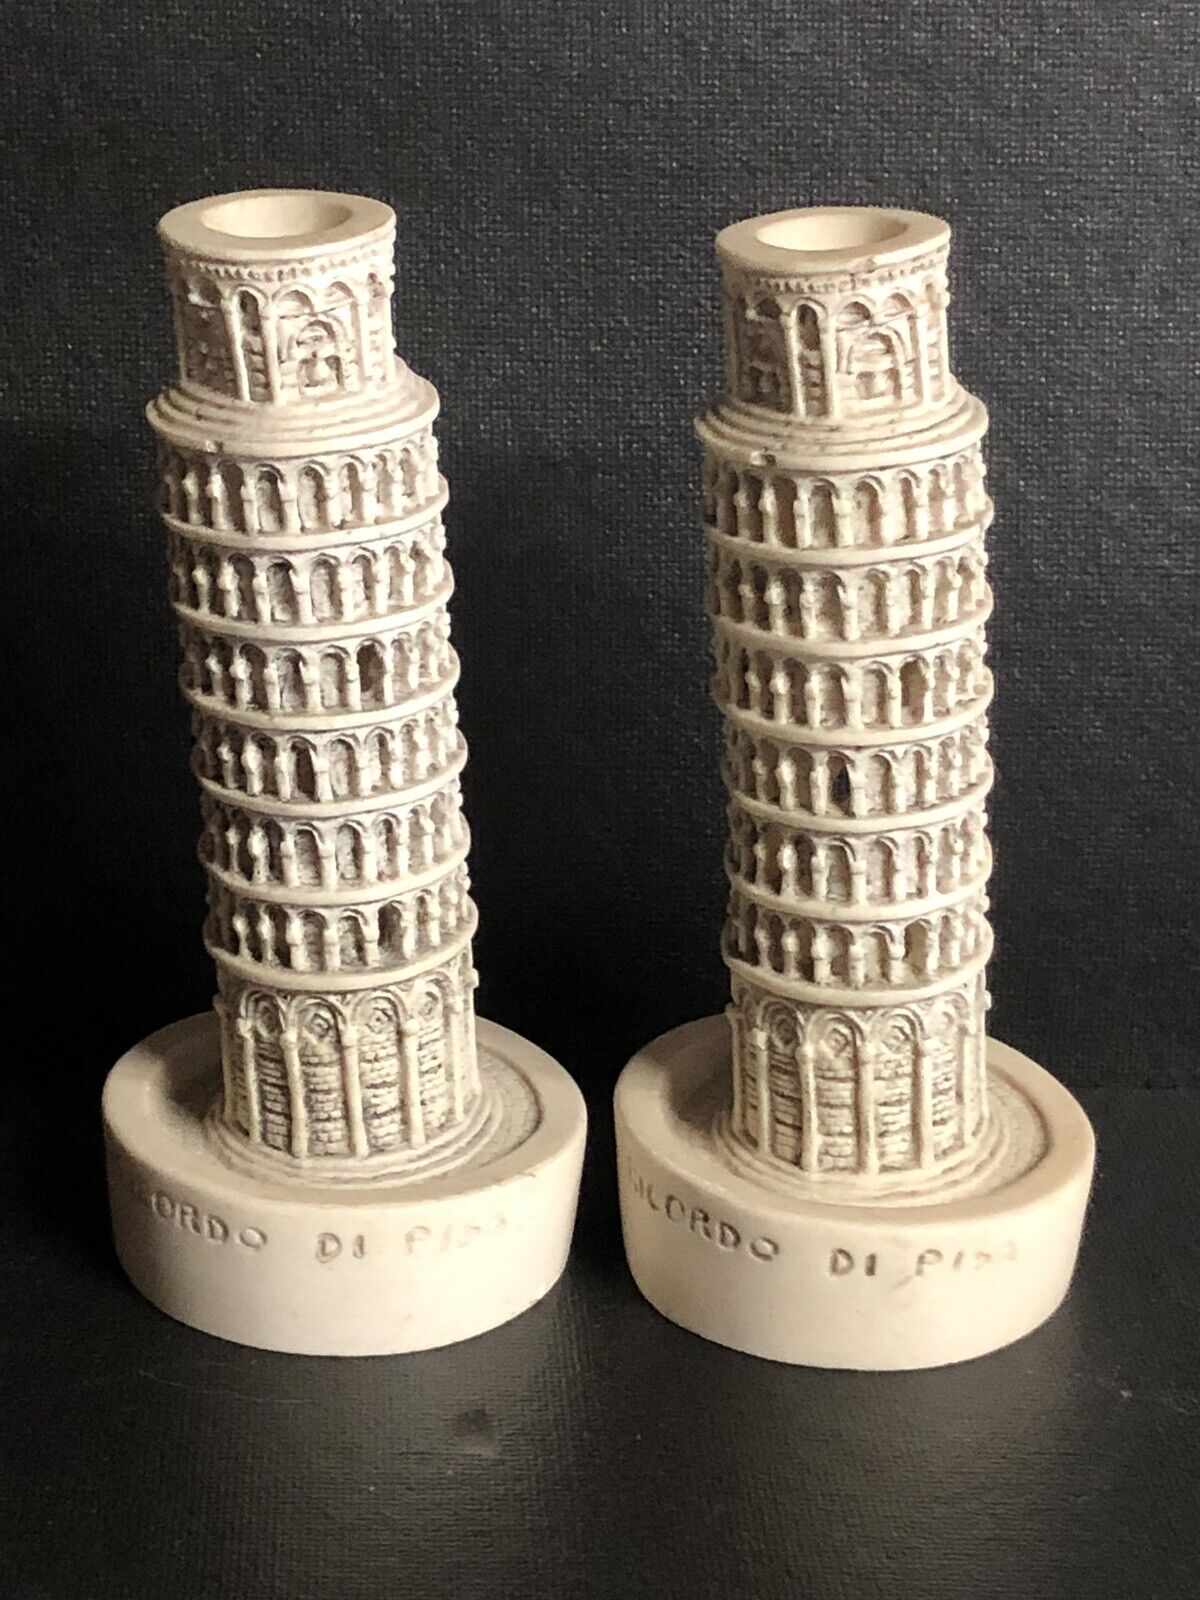 Vintage Italy Souvenir Leaning Tower Of Pisa Candle Holders Recordo DI Pisa 6” H